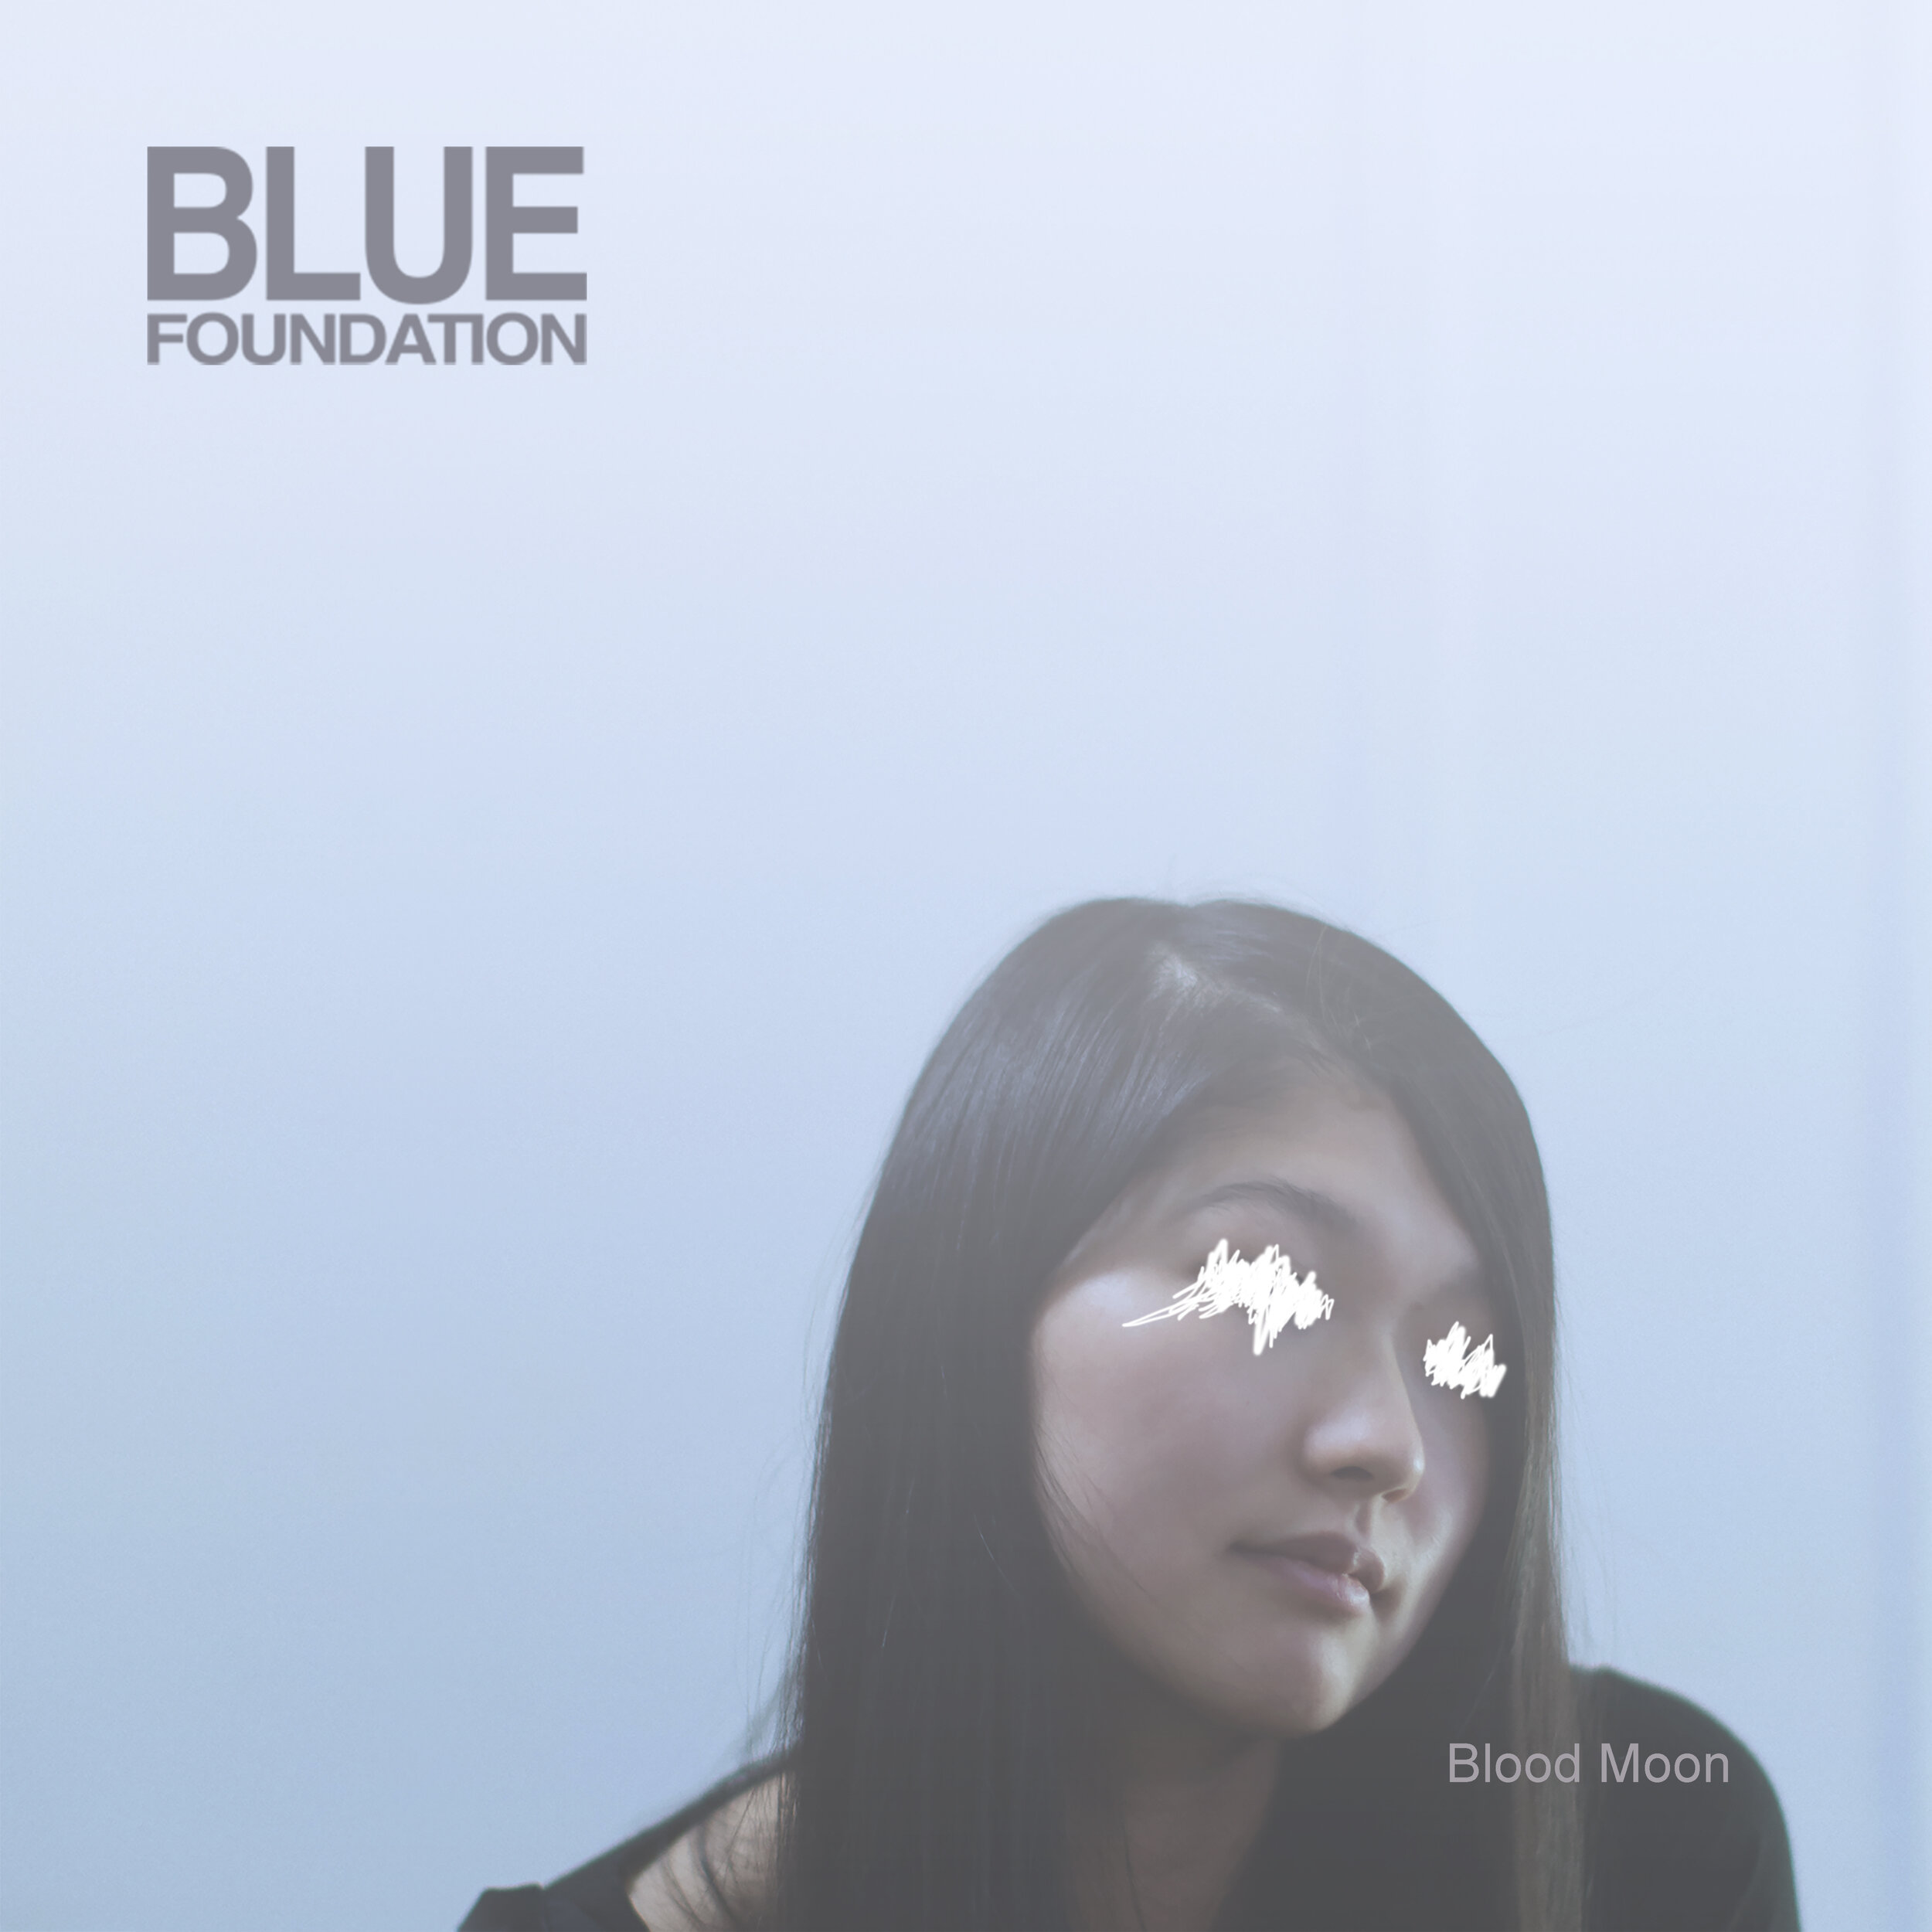 Blue Foundation 'Blood Moon' 2016 (Produced by Tobias Wilner)